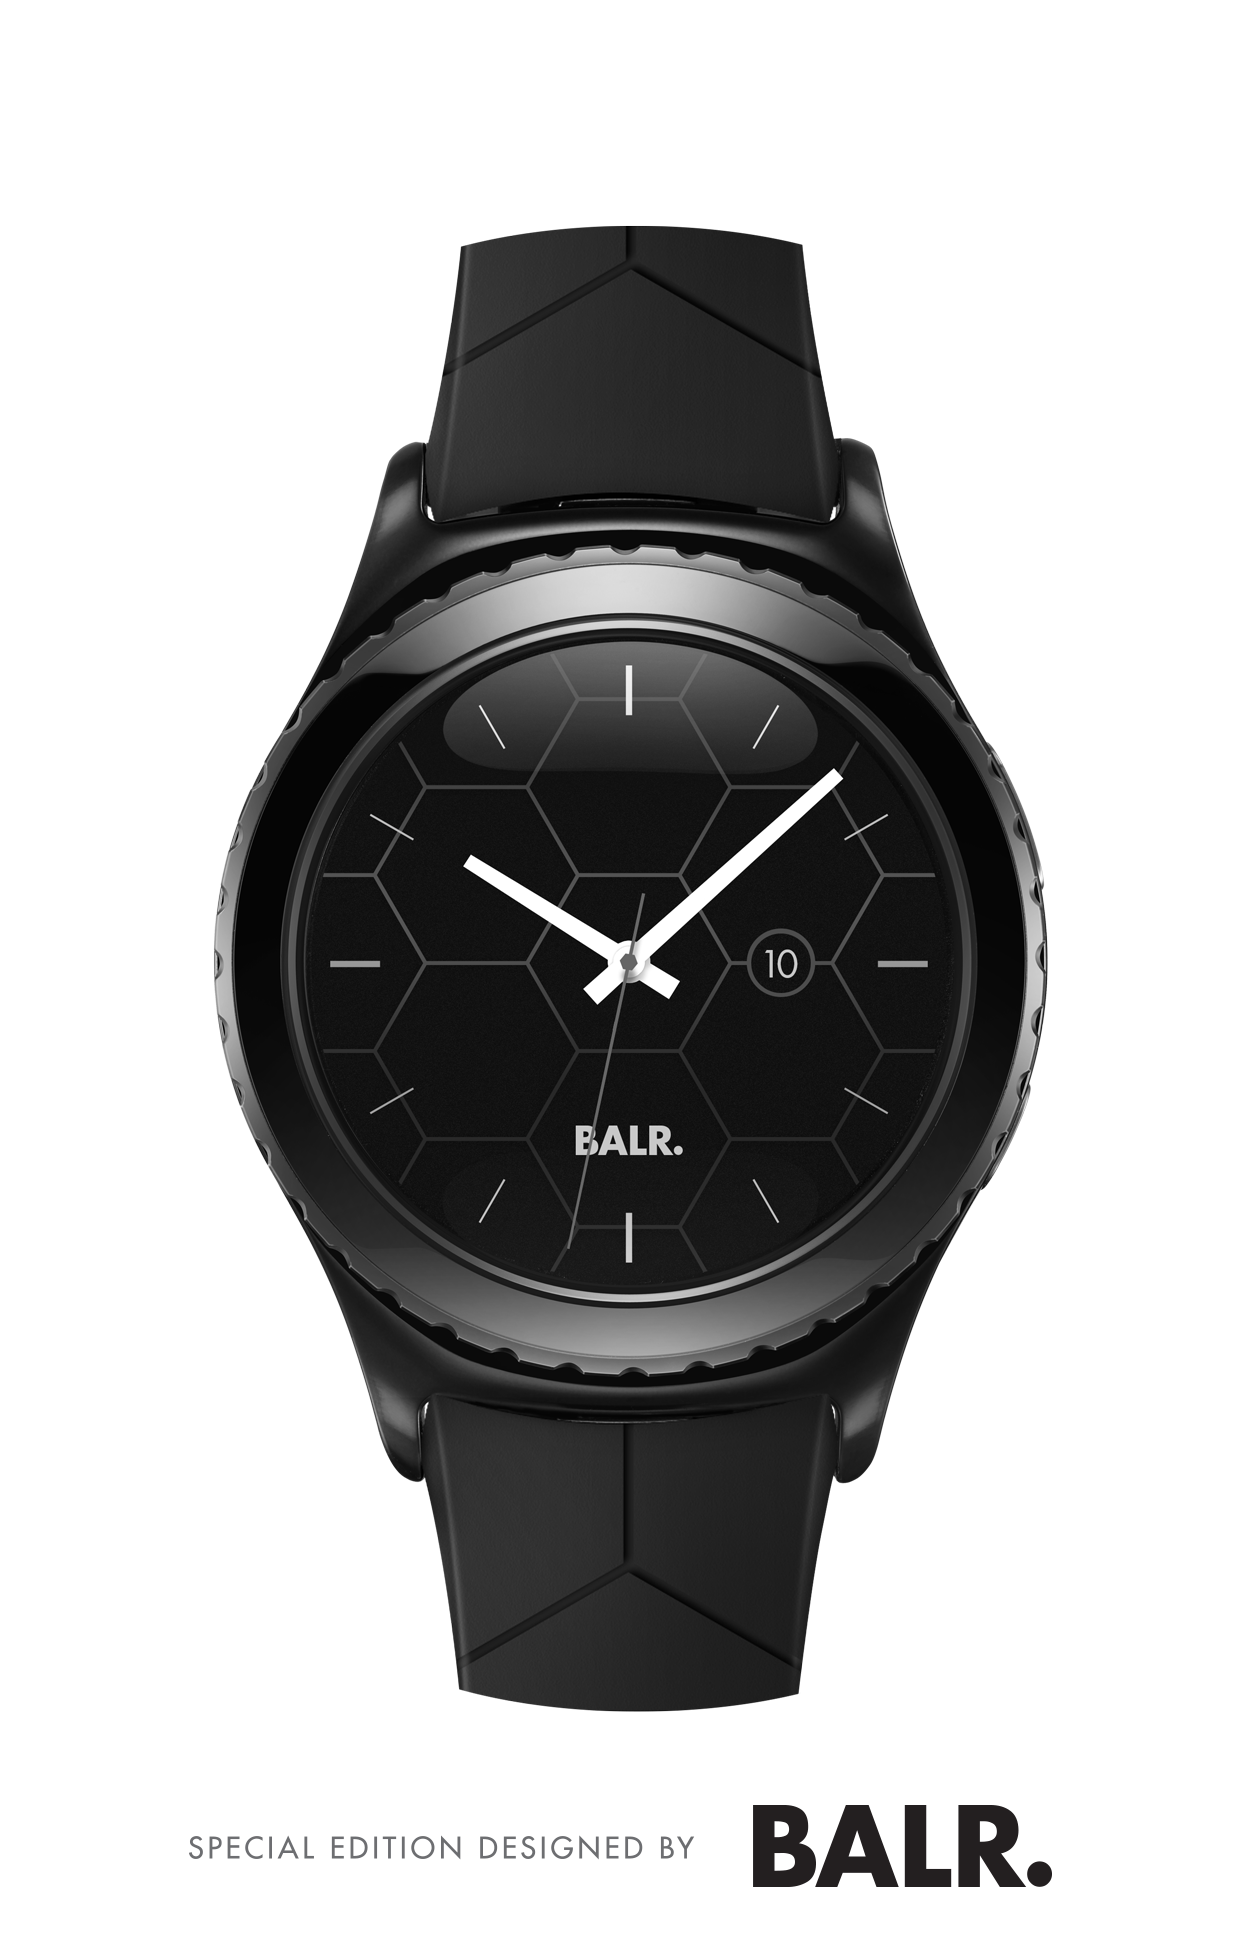 Samsung launch an exclusive BALR. edition of the Gear S2 in The Netherlands - SamMobile - SamMobile